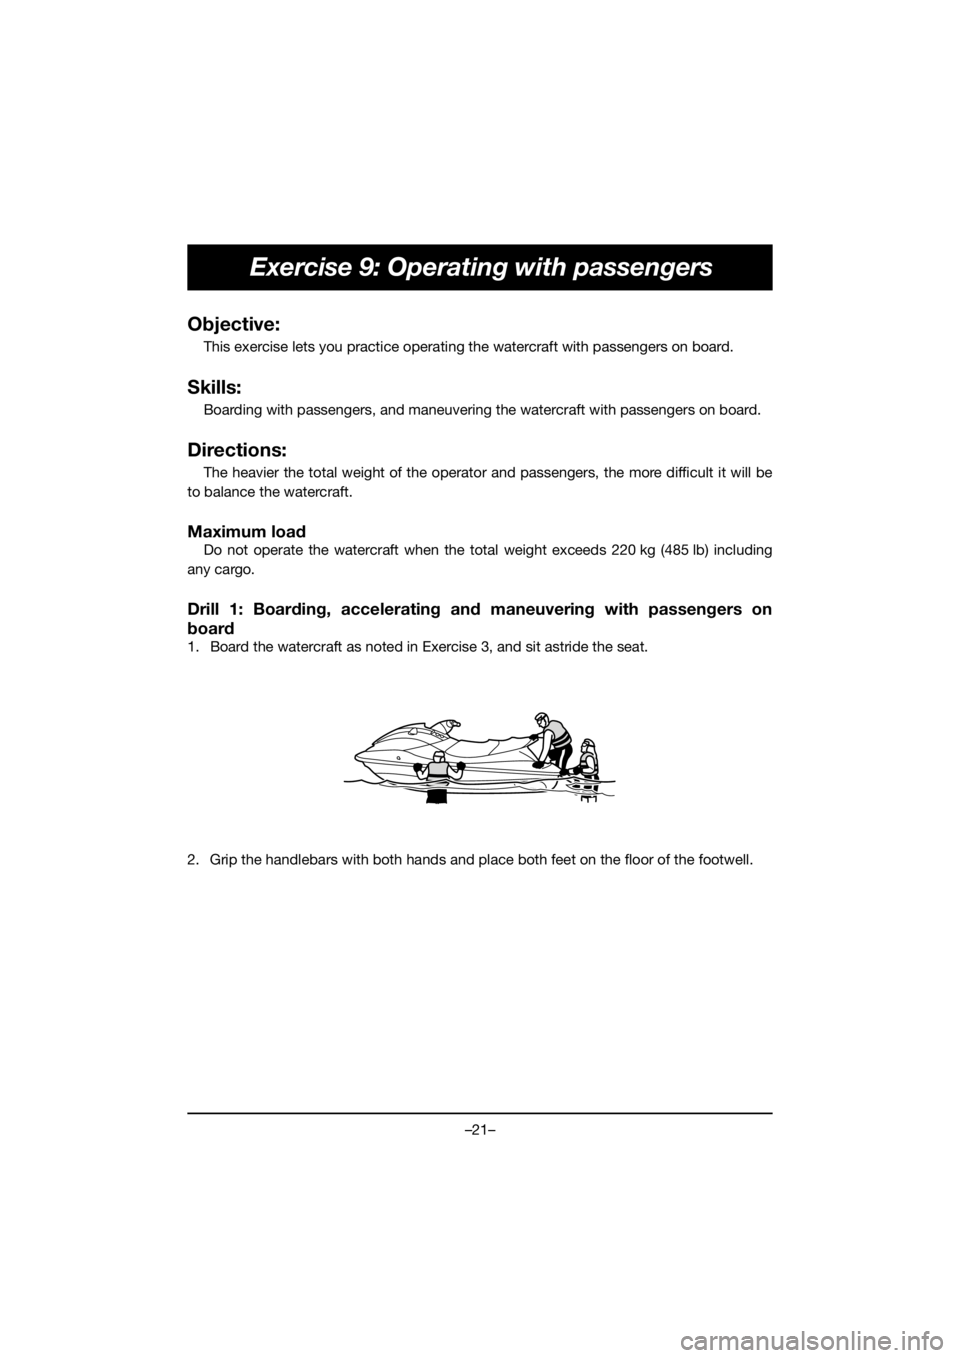 YAMAHA EX SPORT 2019  Manual de utilização (in Portuguese) –21–
Exercise 9: Operating with passengers
Objective:
This exercise lets you practice operating the watercraft with passengers on board.
Skills:
Boarding with passengers, and maneuvering the water